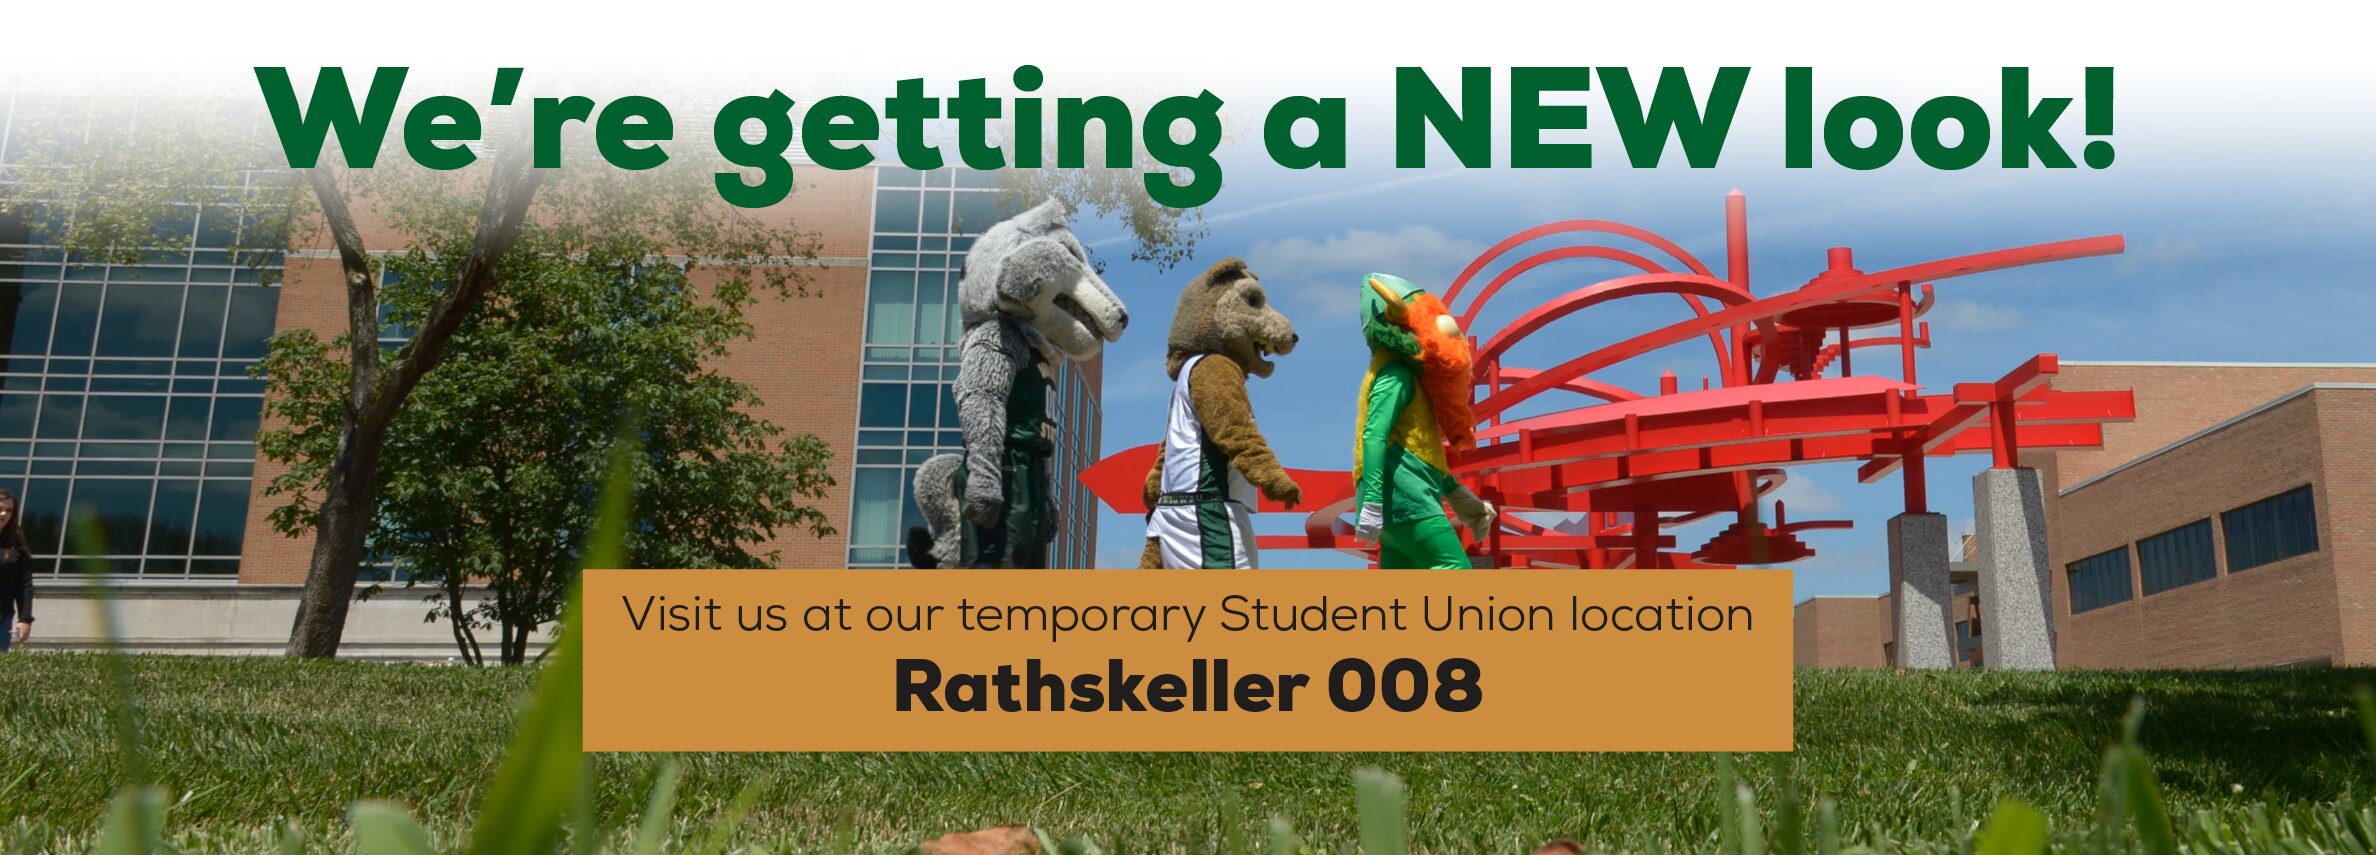 We're getting a NEW look! Visit us at our temporary Student Union location Rathskeller 008